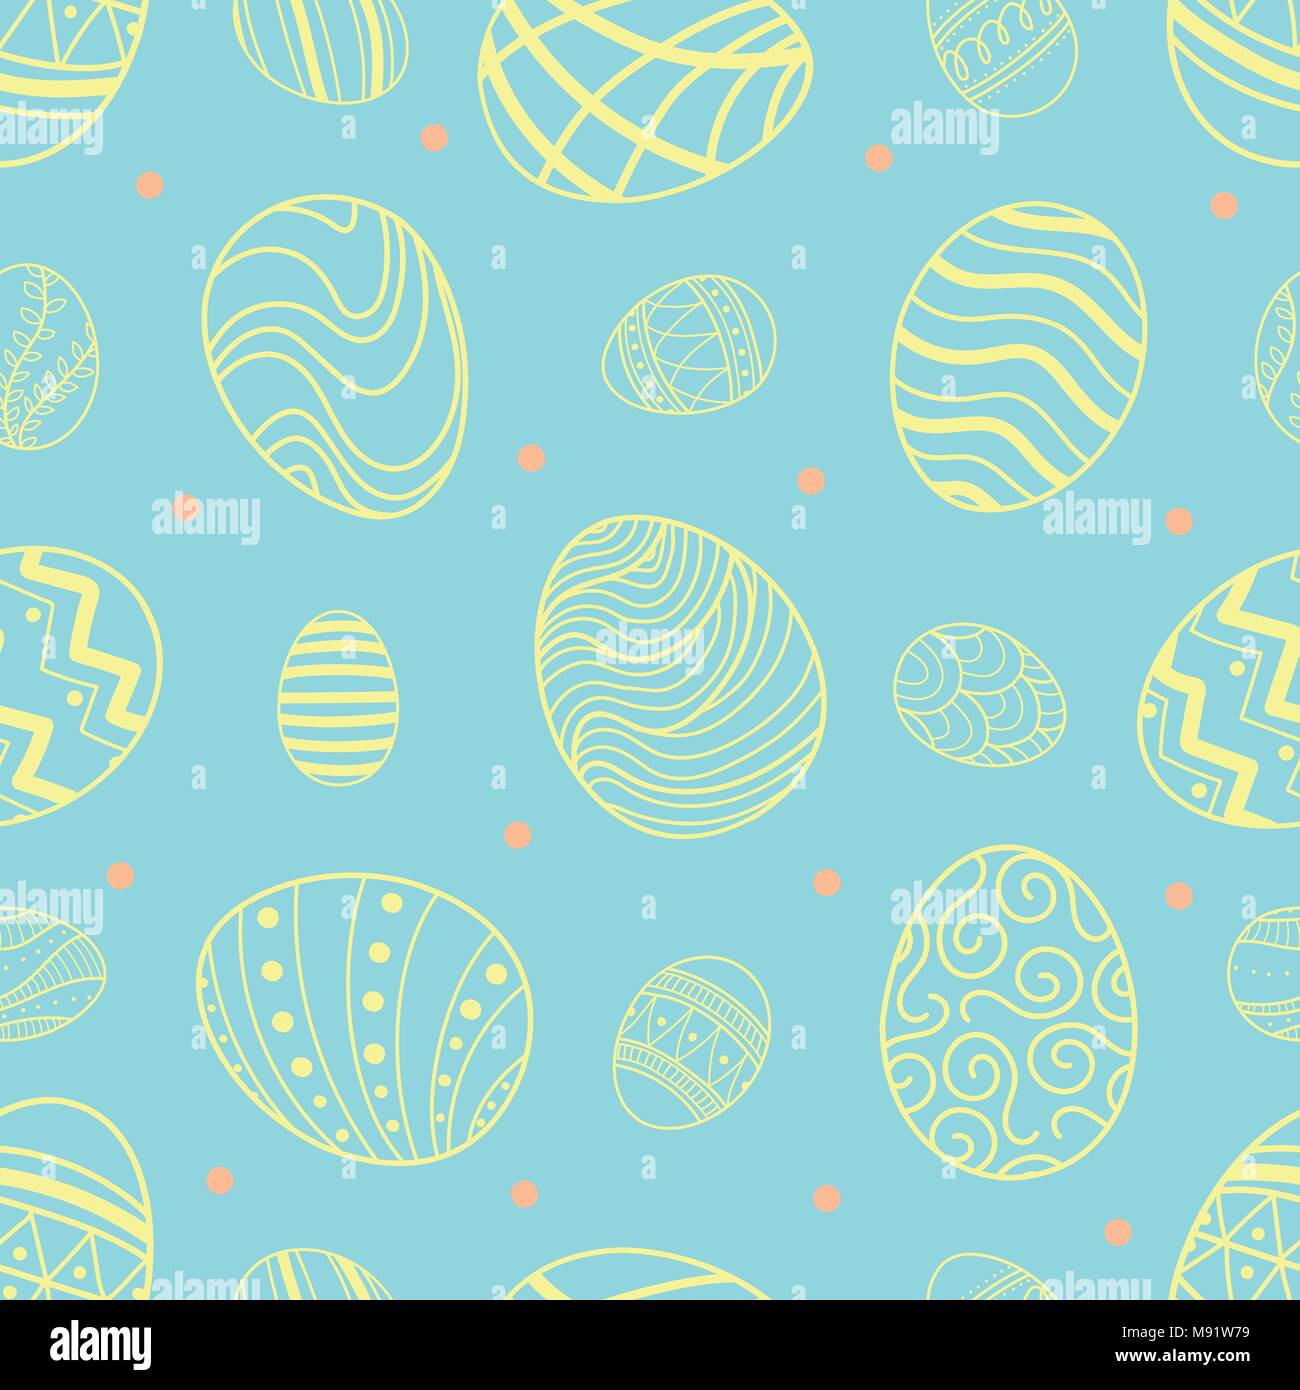 Easter eggs in yellow outline and pink dots random on pastel blue background. Cute hand drawn seamless pattern design for Easter festival in vector il Stock Vector